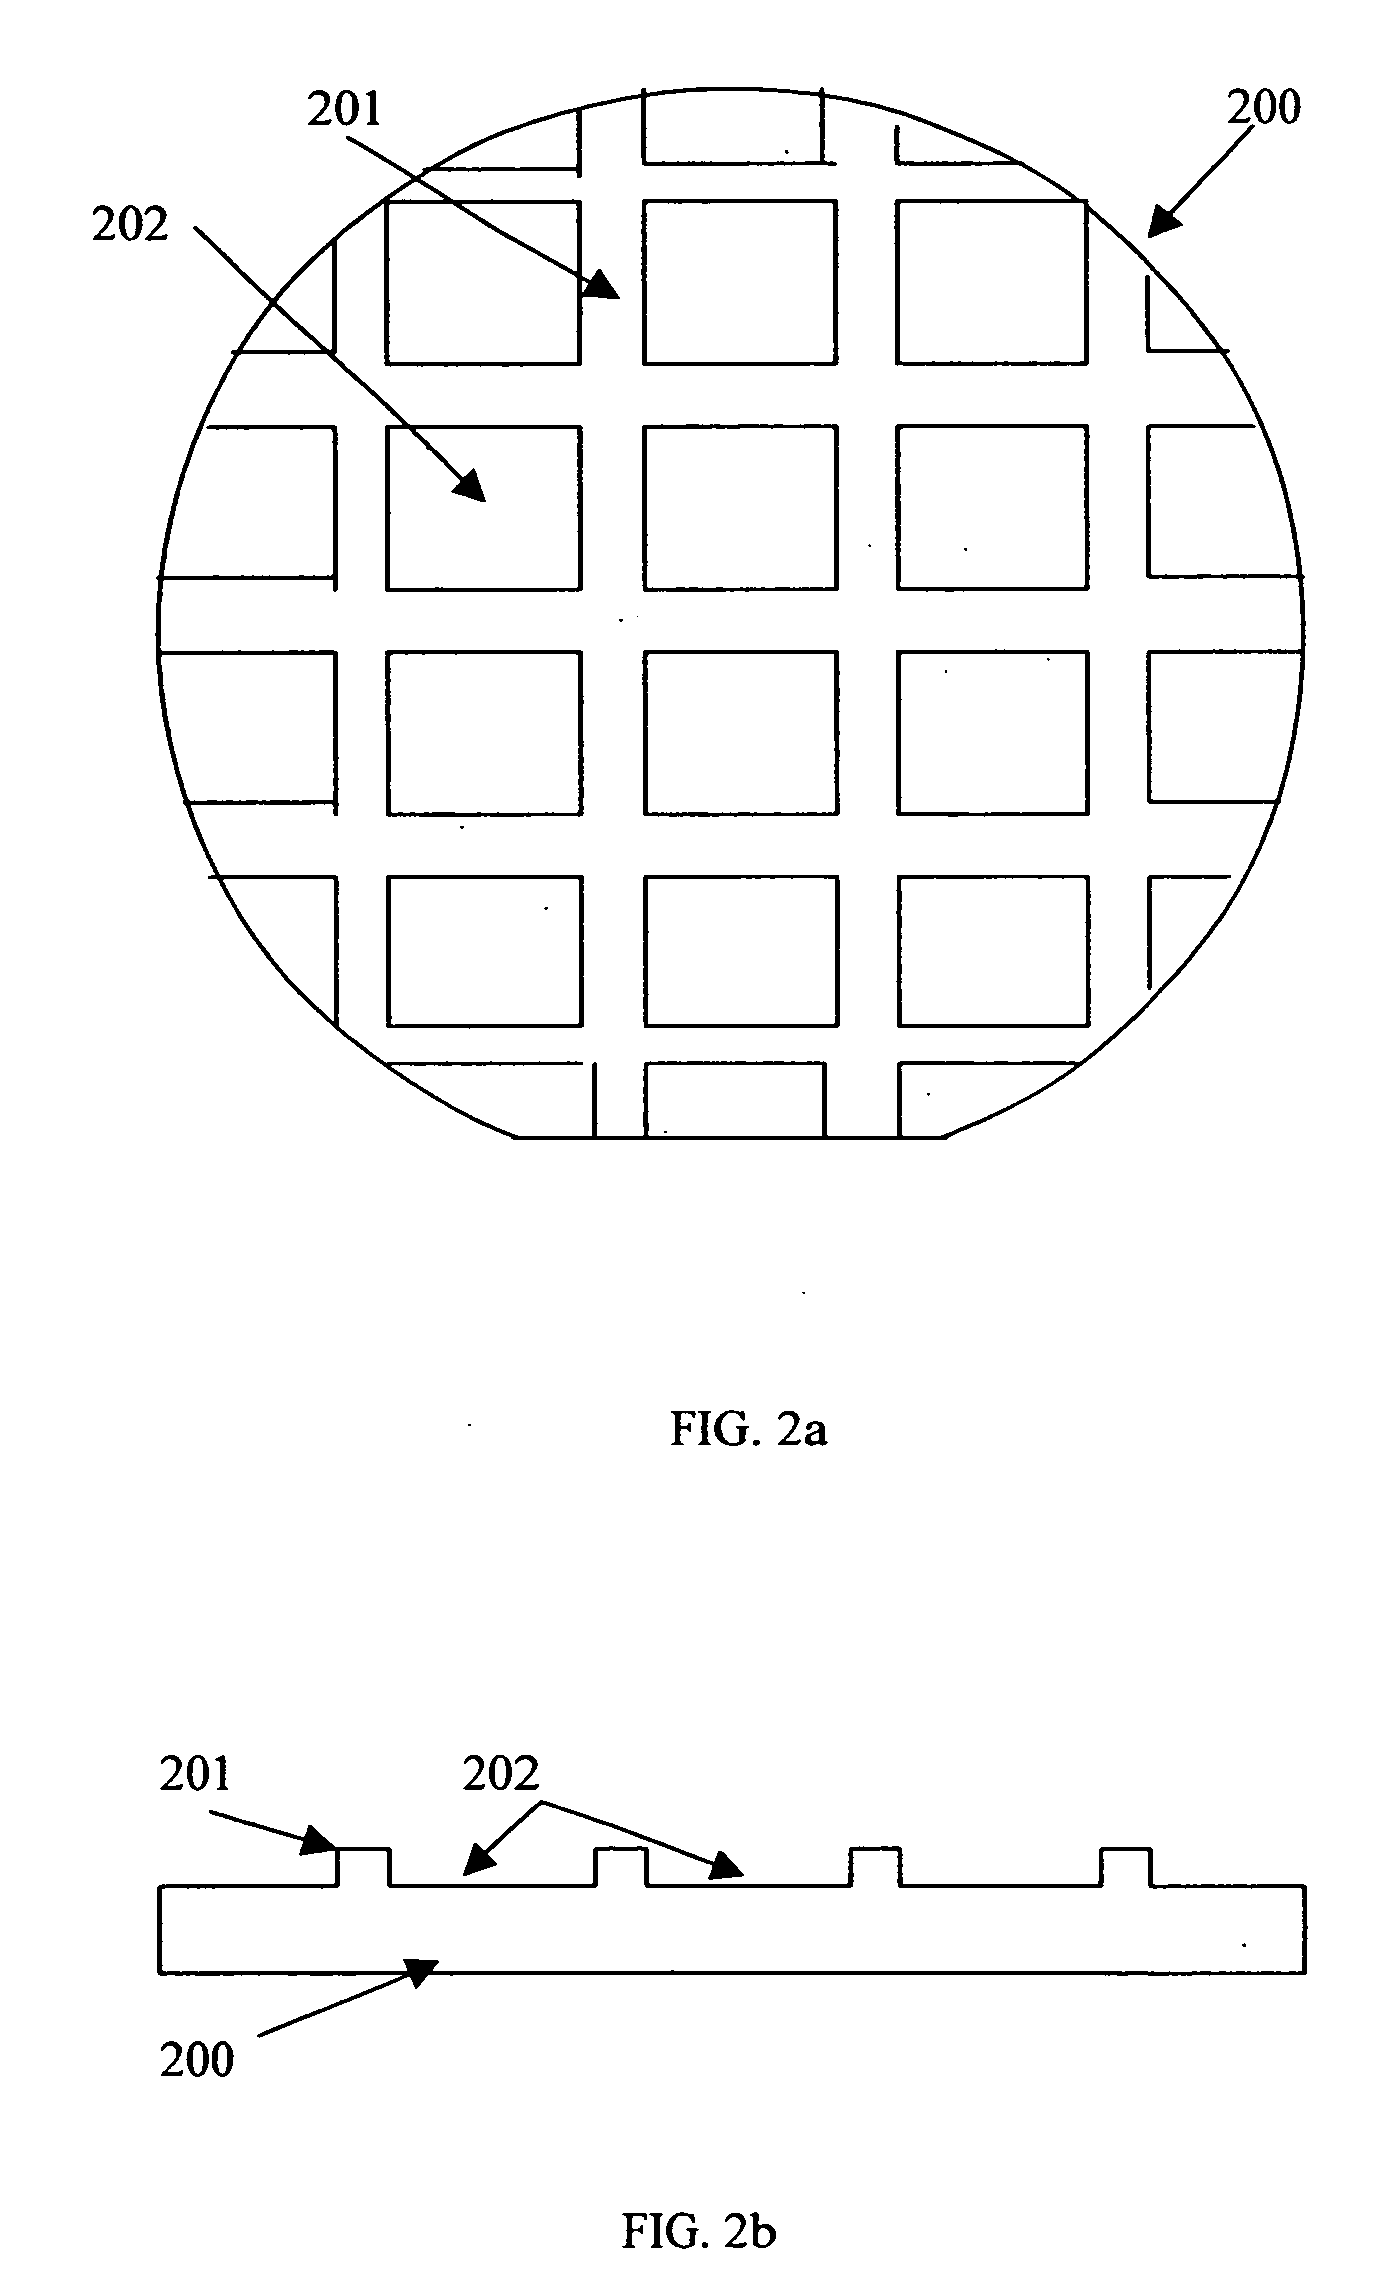 Quasi group III-nitride substrates and methods of mass production of the same